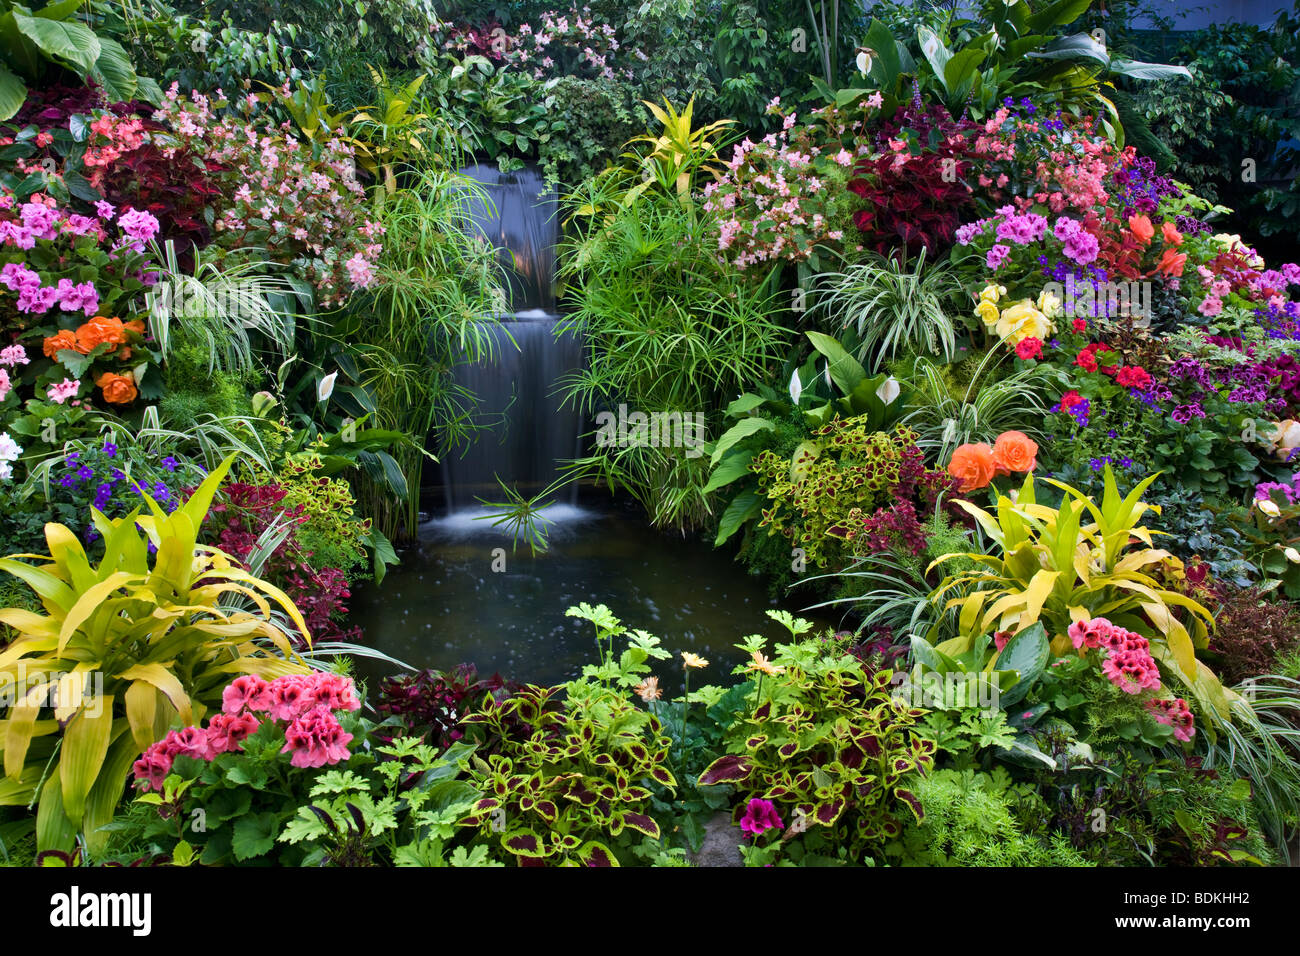 The Show Greenhouse at the Butchart Gardens, Victoria, Vancouver Island, British Columbia, Canada. Stock Photo